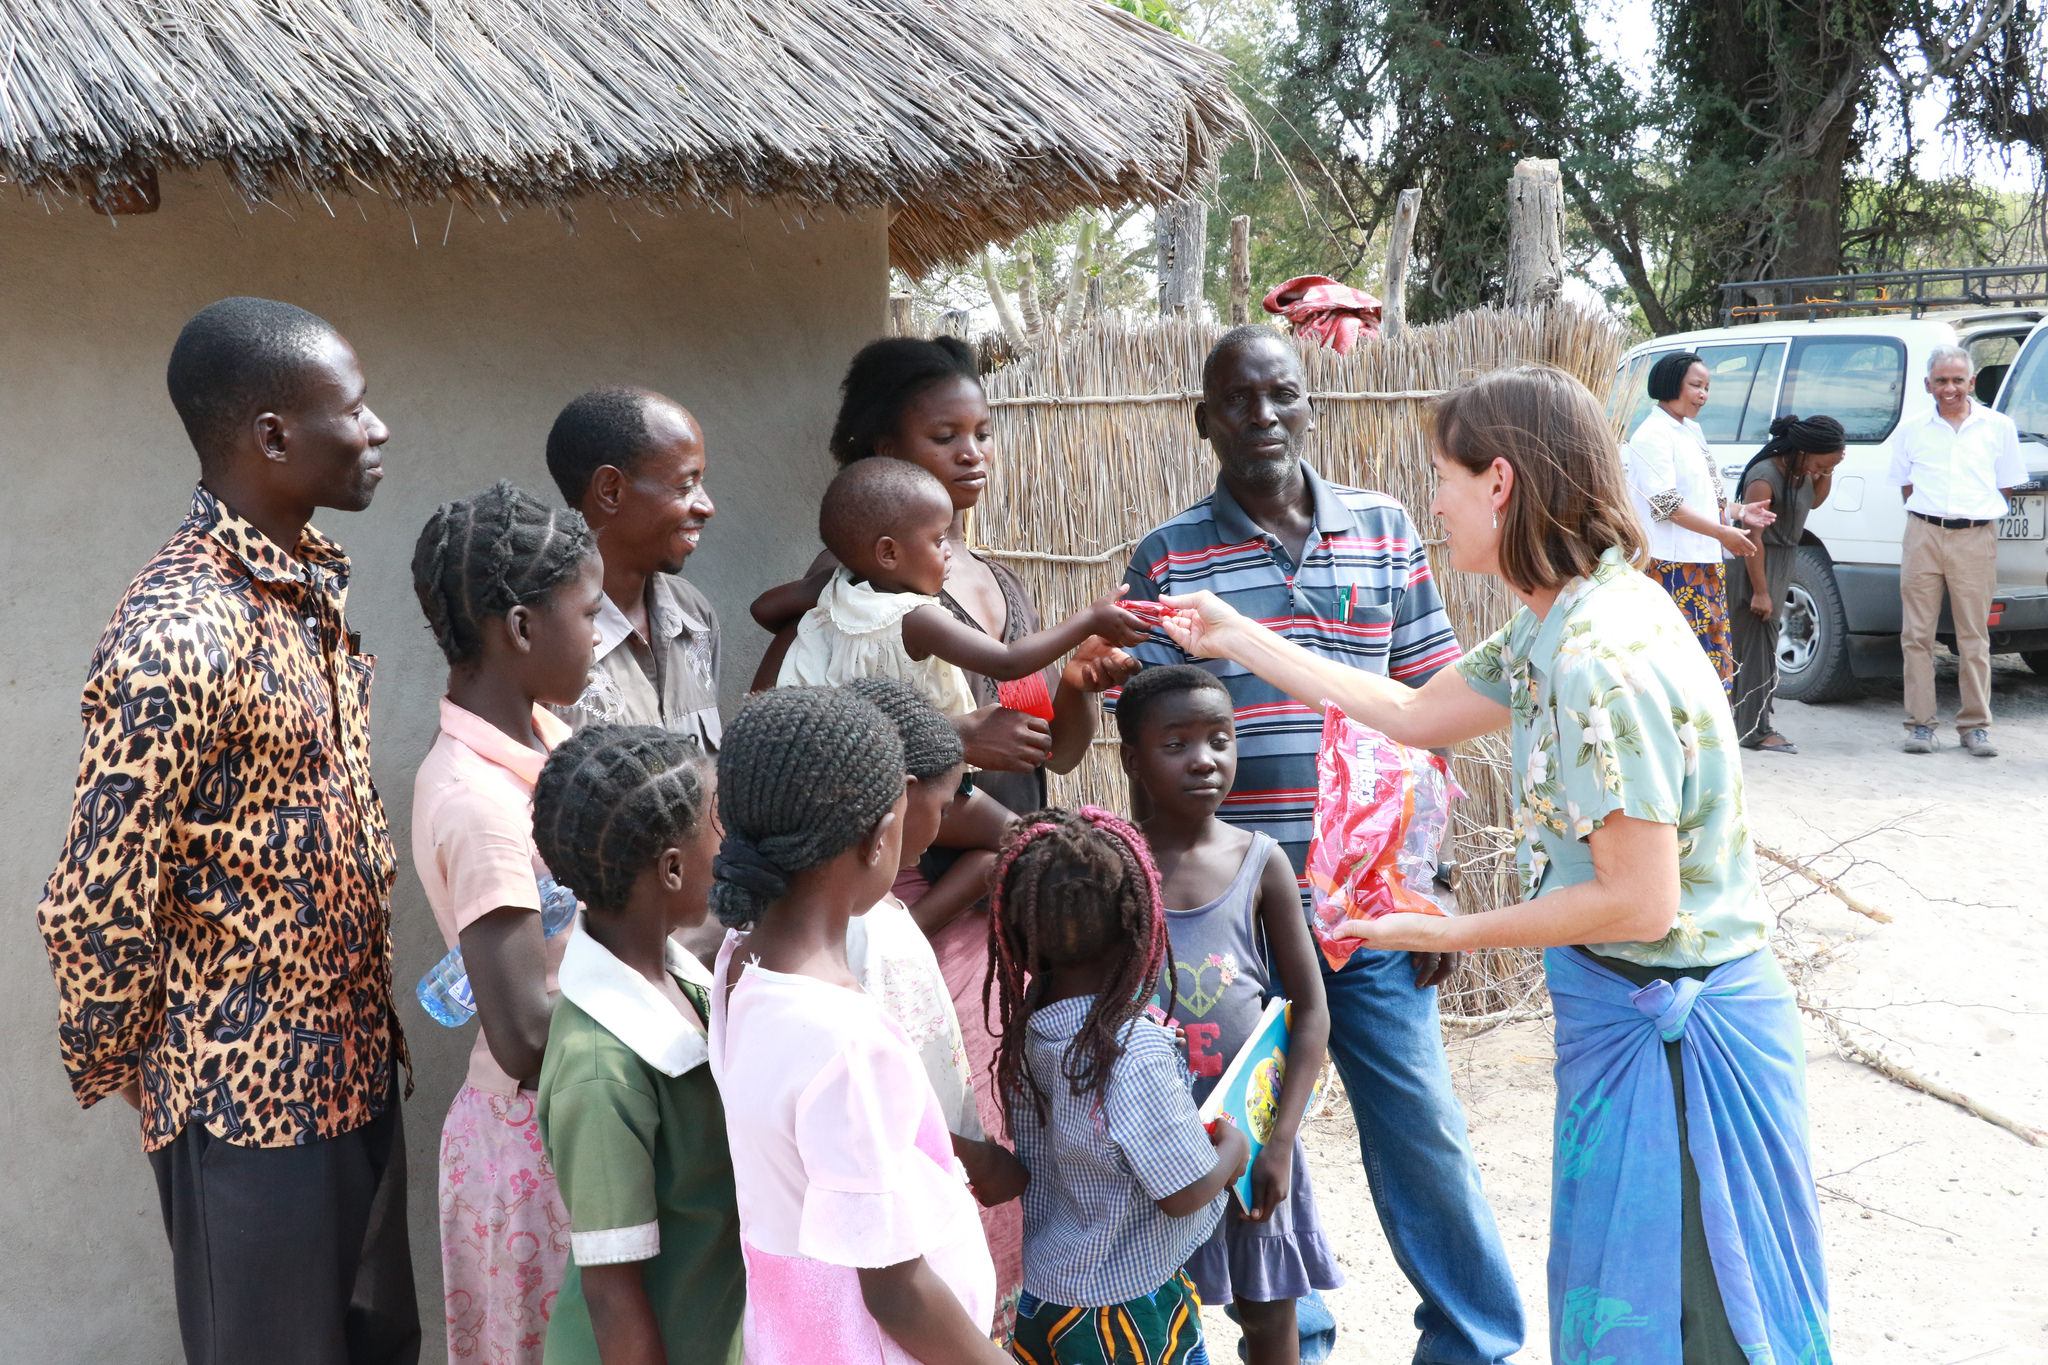 Dr. Helene on Mission trip with a group of community members